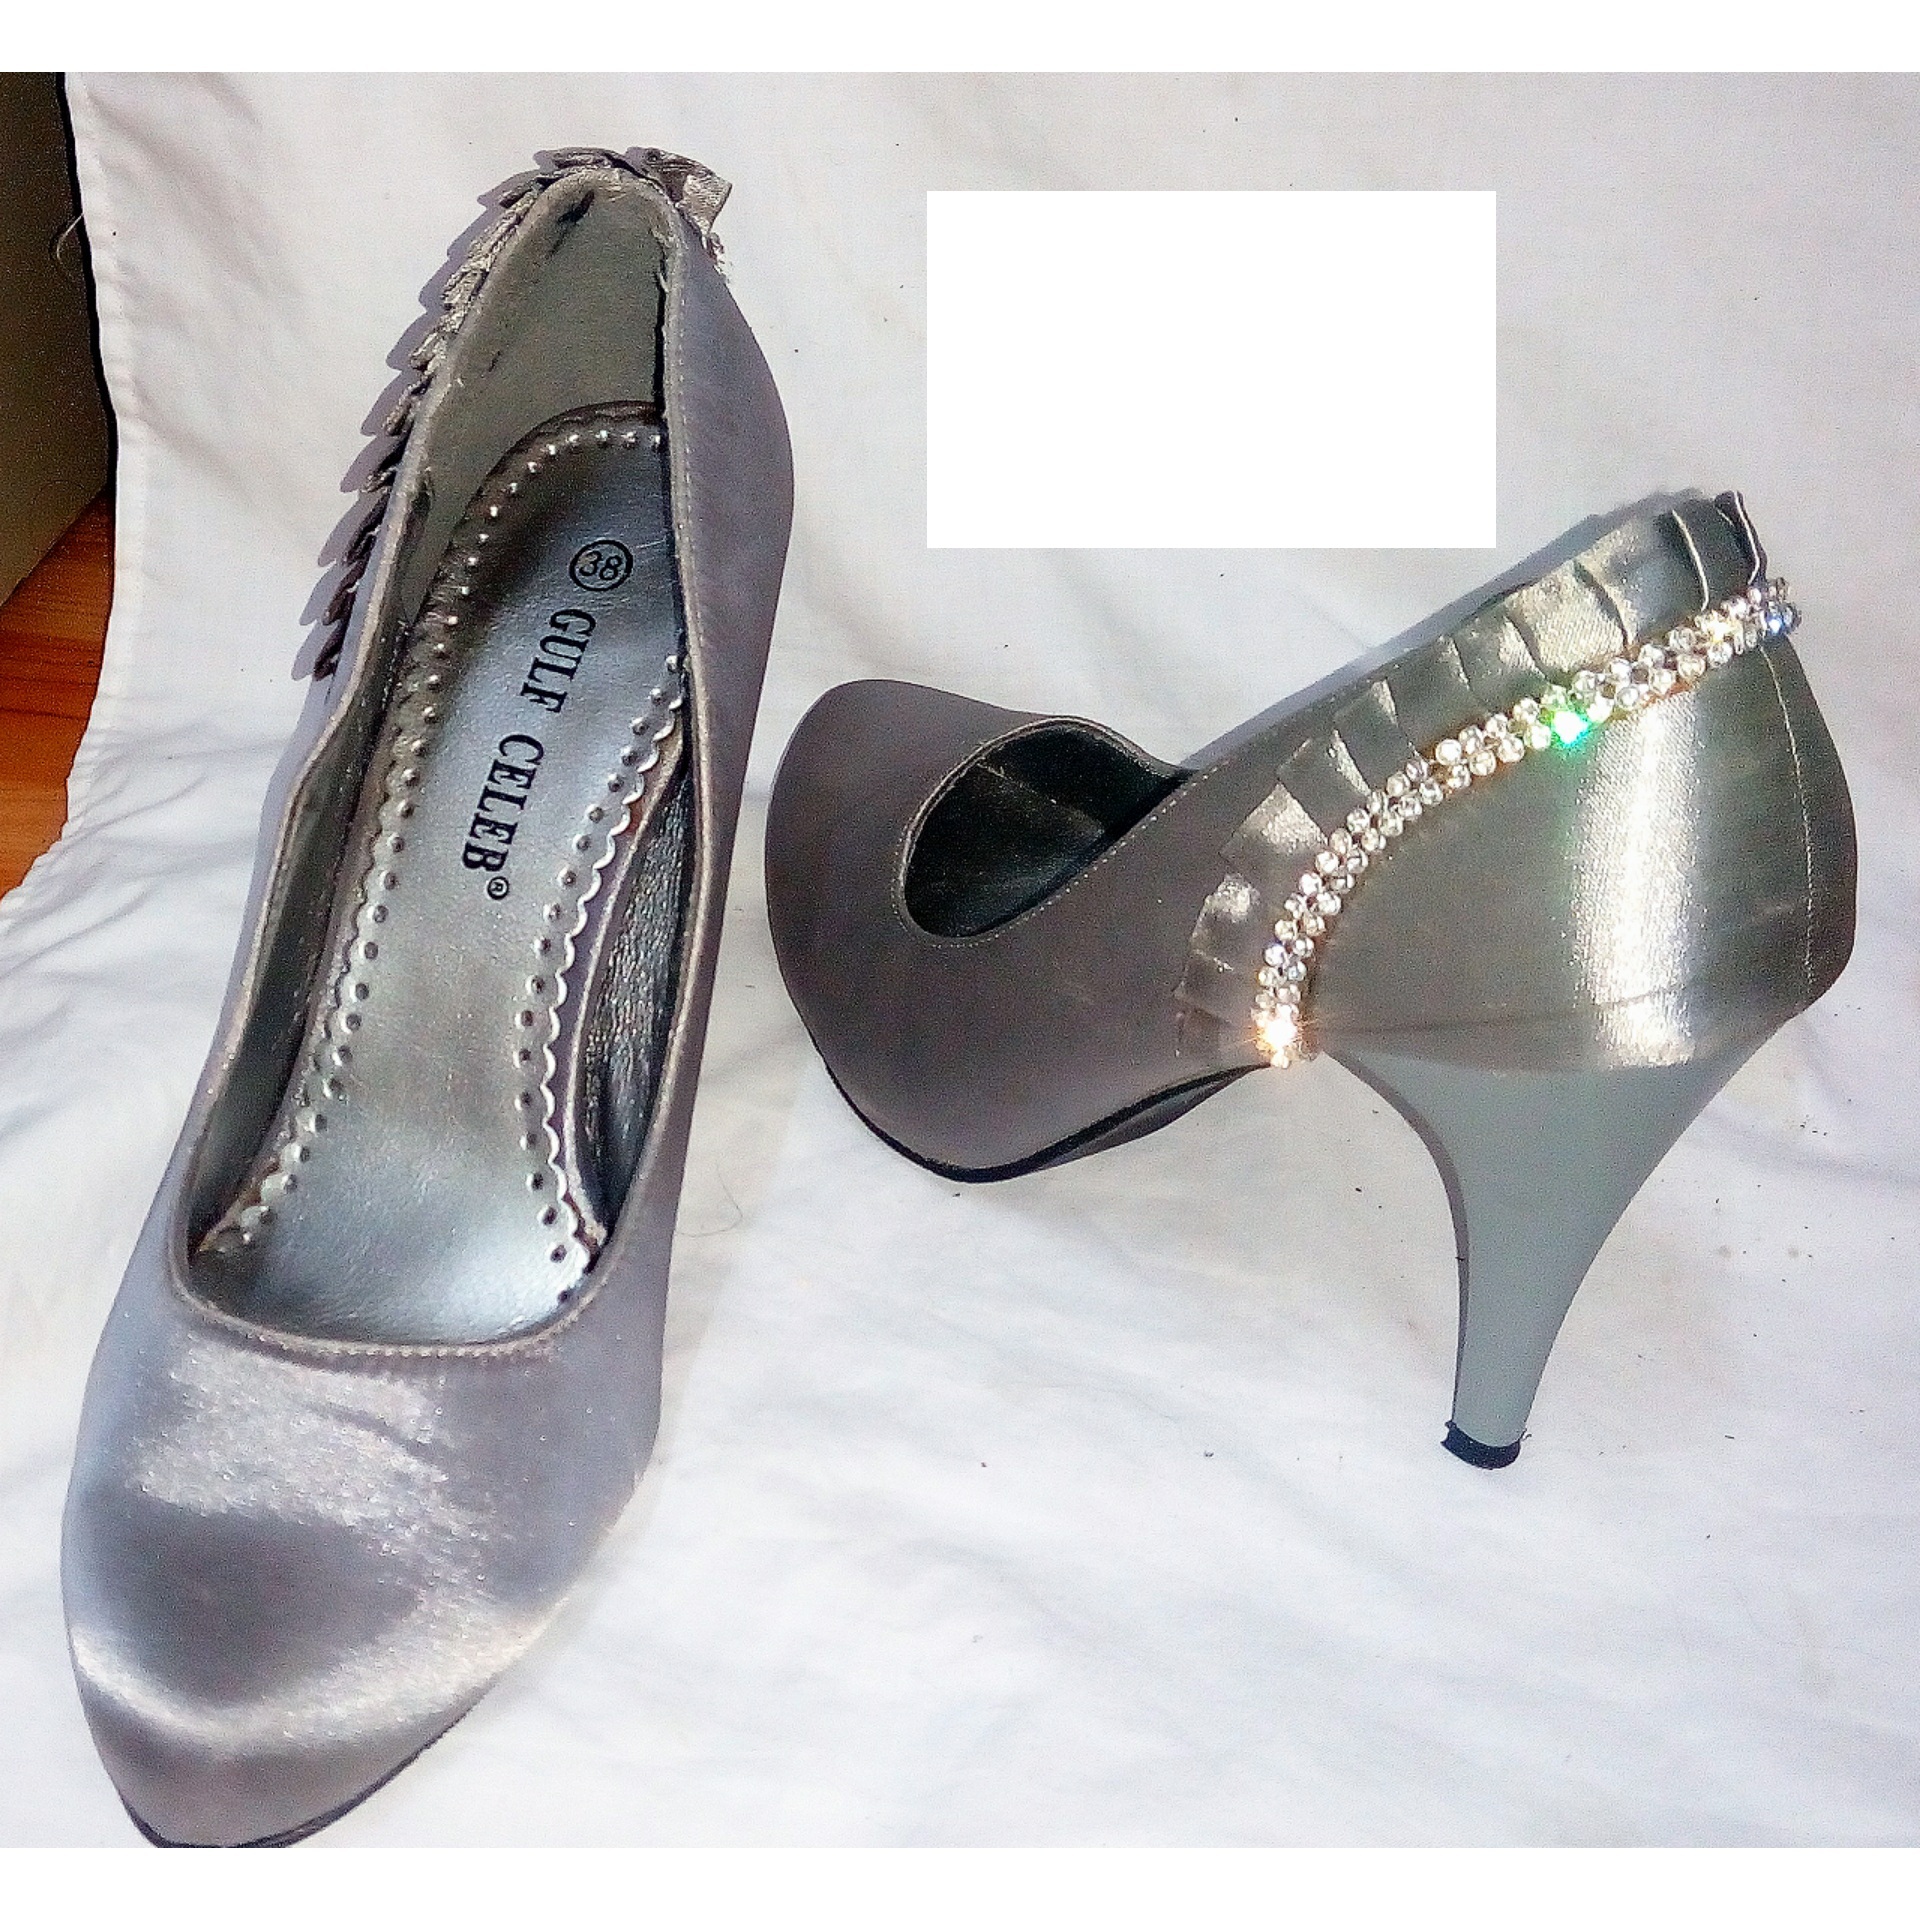 Ladies Shoes for AED 5 AND aed 10 !!